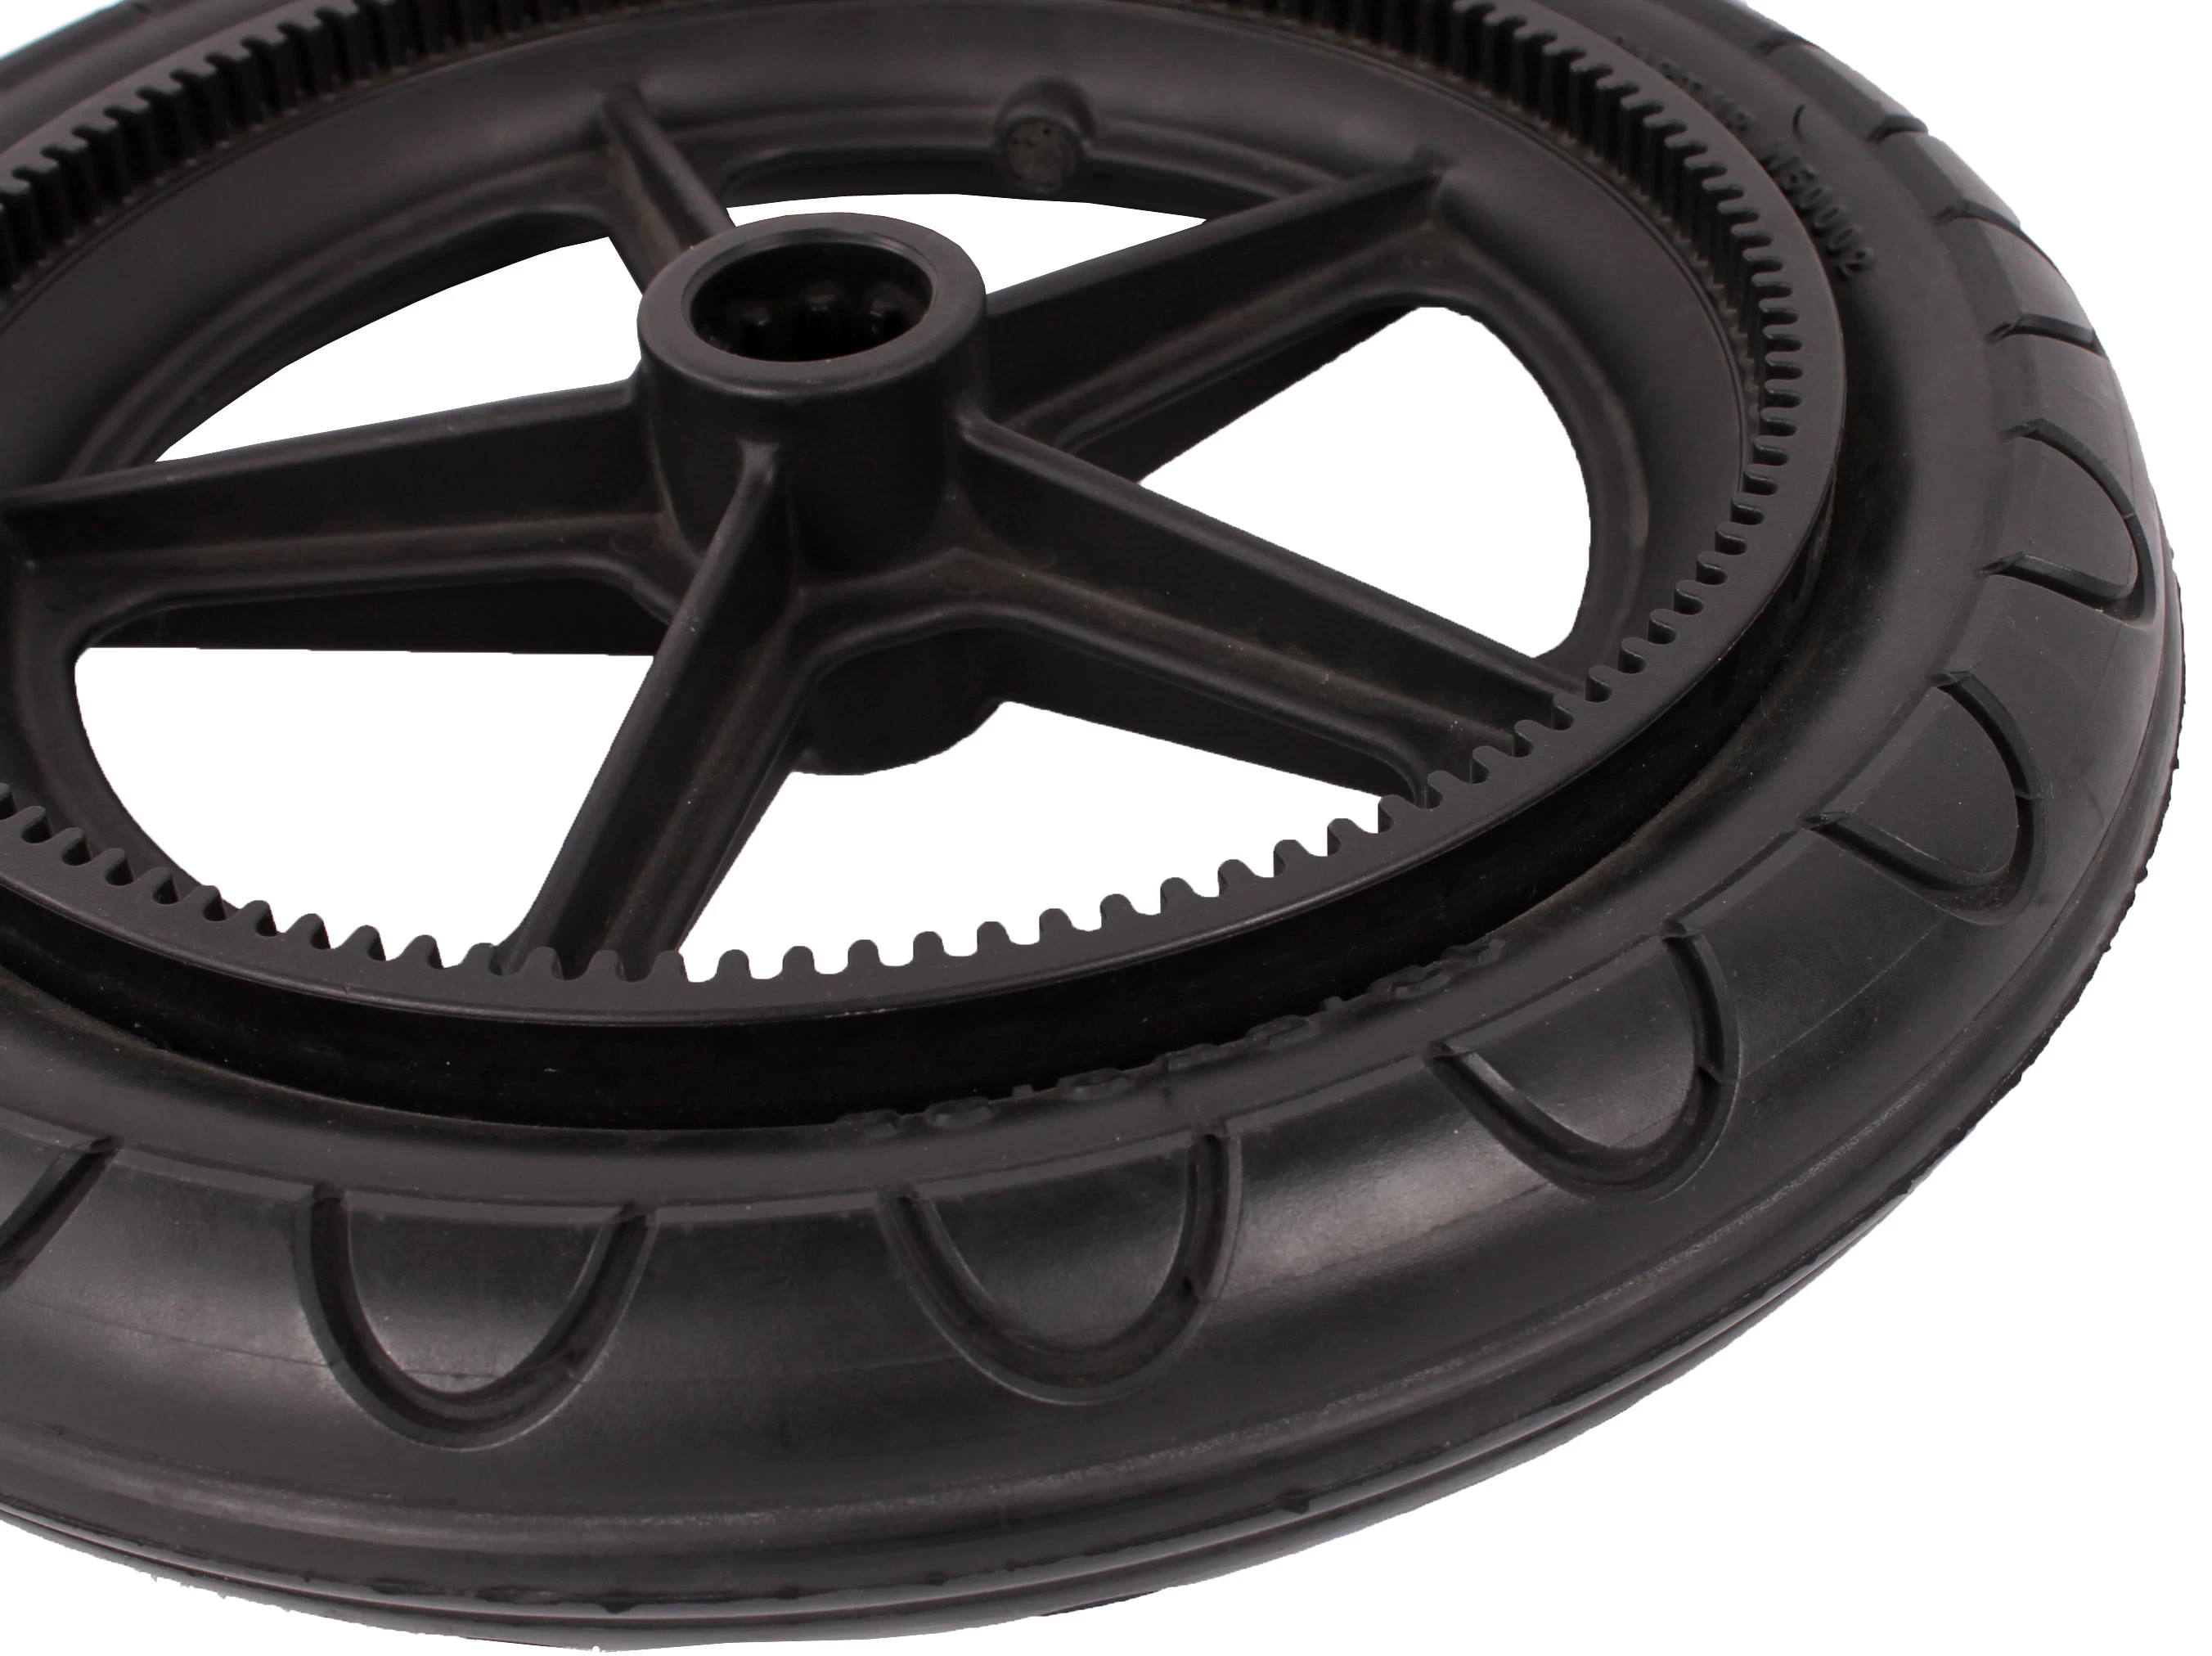 china baby stroller tire suppliers,China Polyurethane  tire Manufacturers